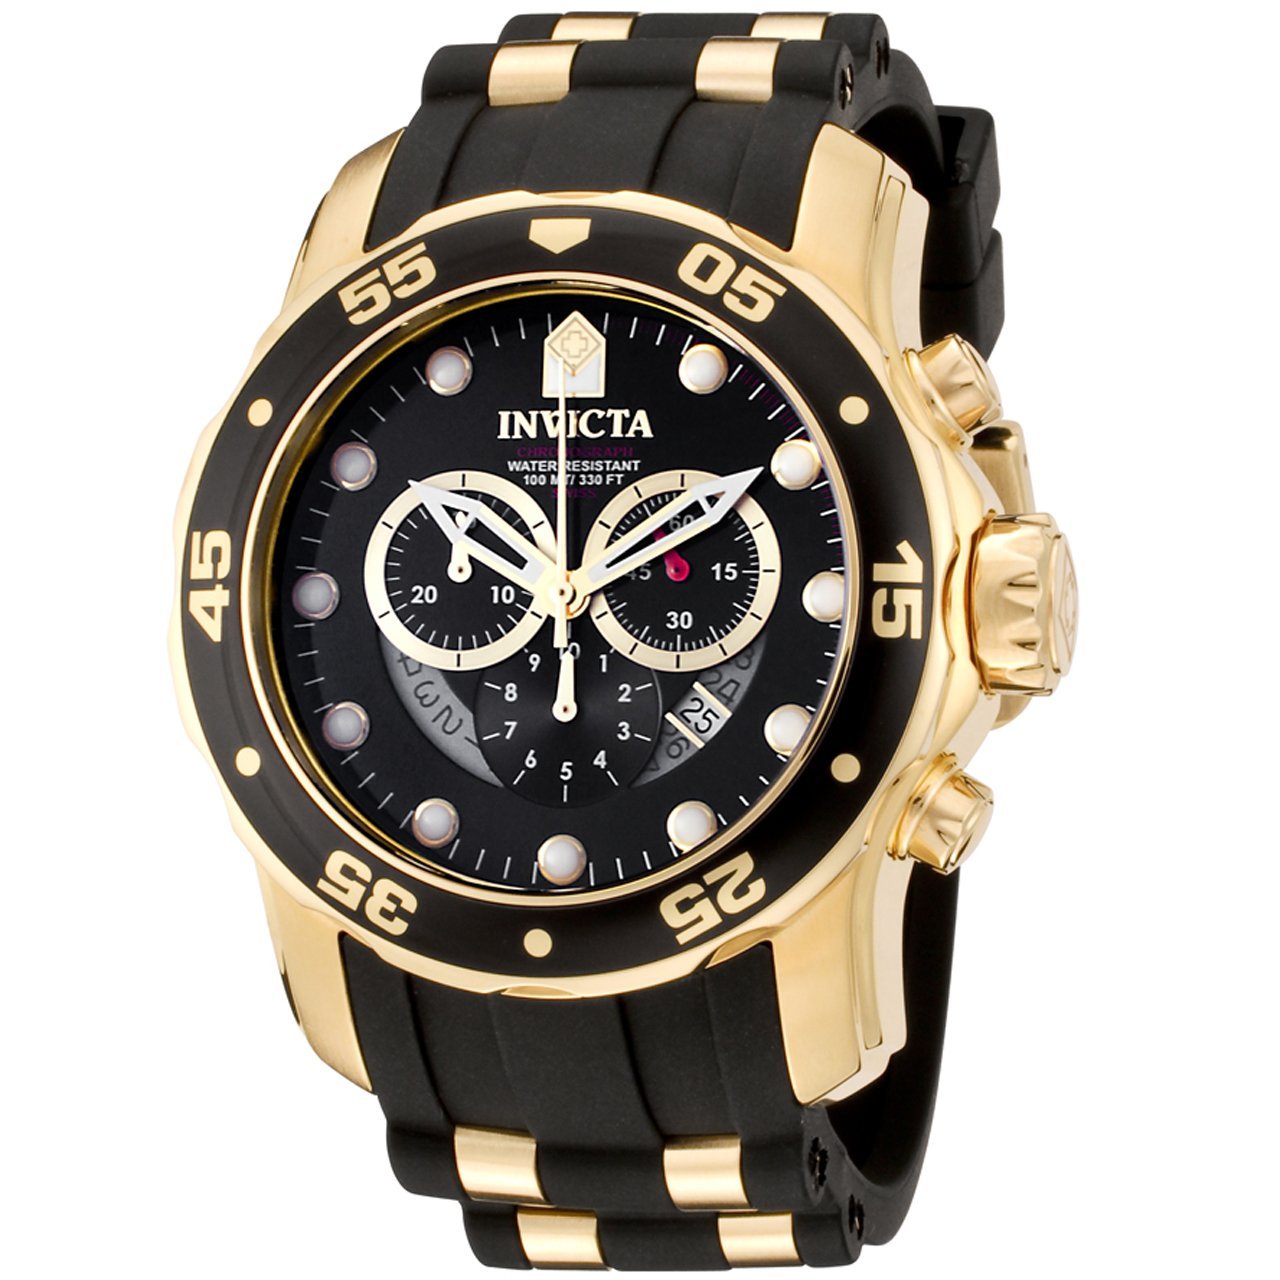 Invicta Watches - At Affordable Prices Unmatched Standard - Fan of Fashion Wrist Watches